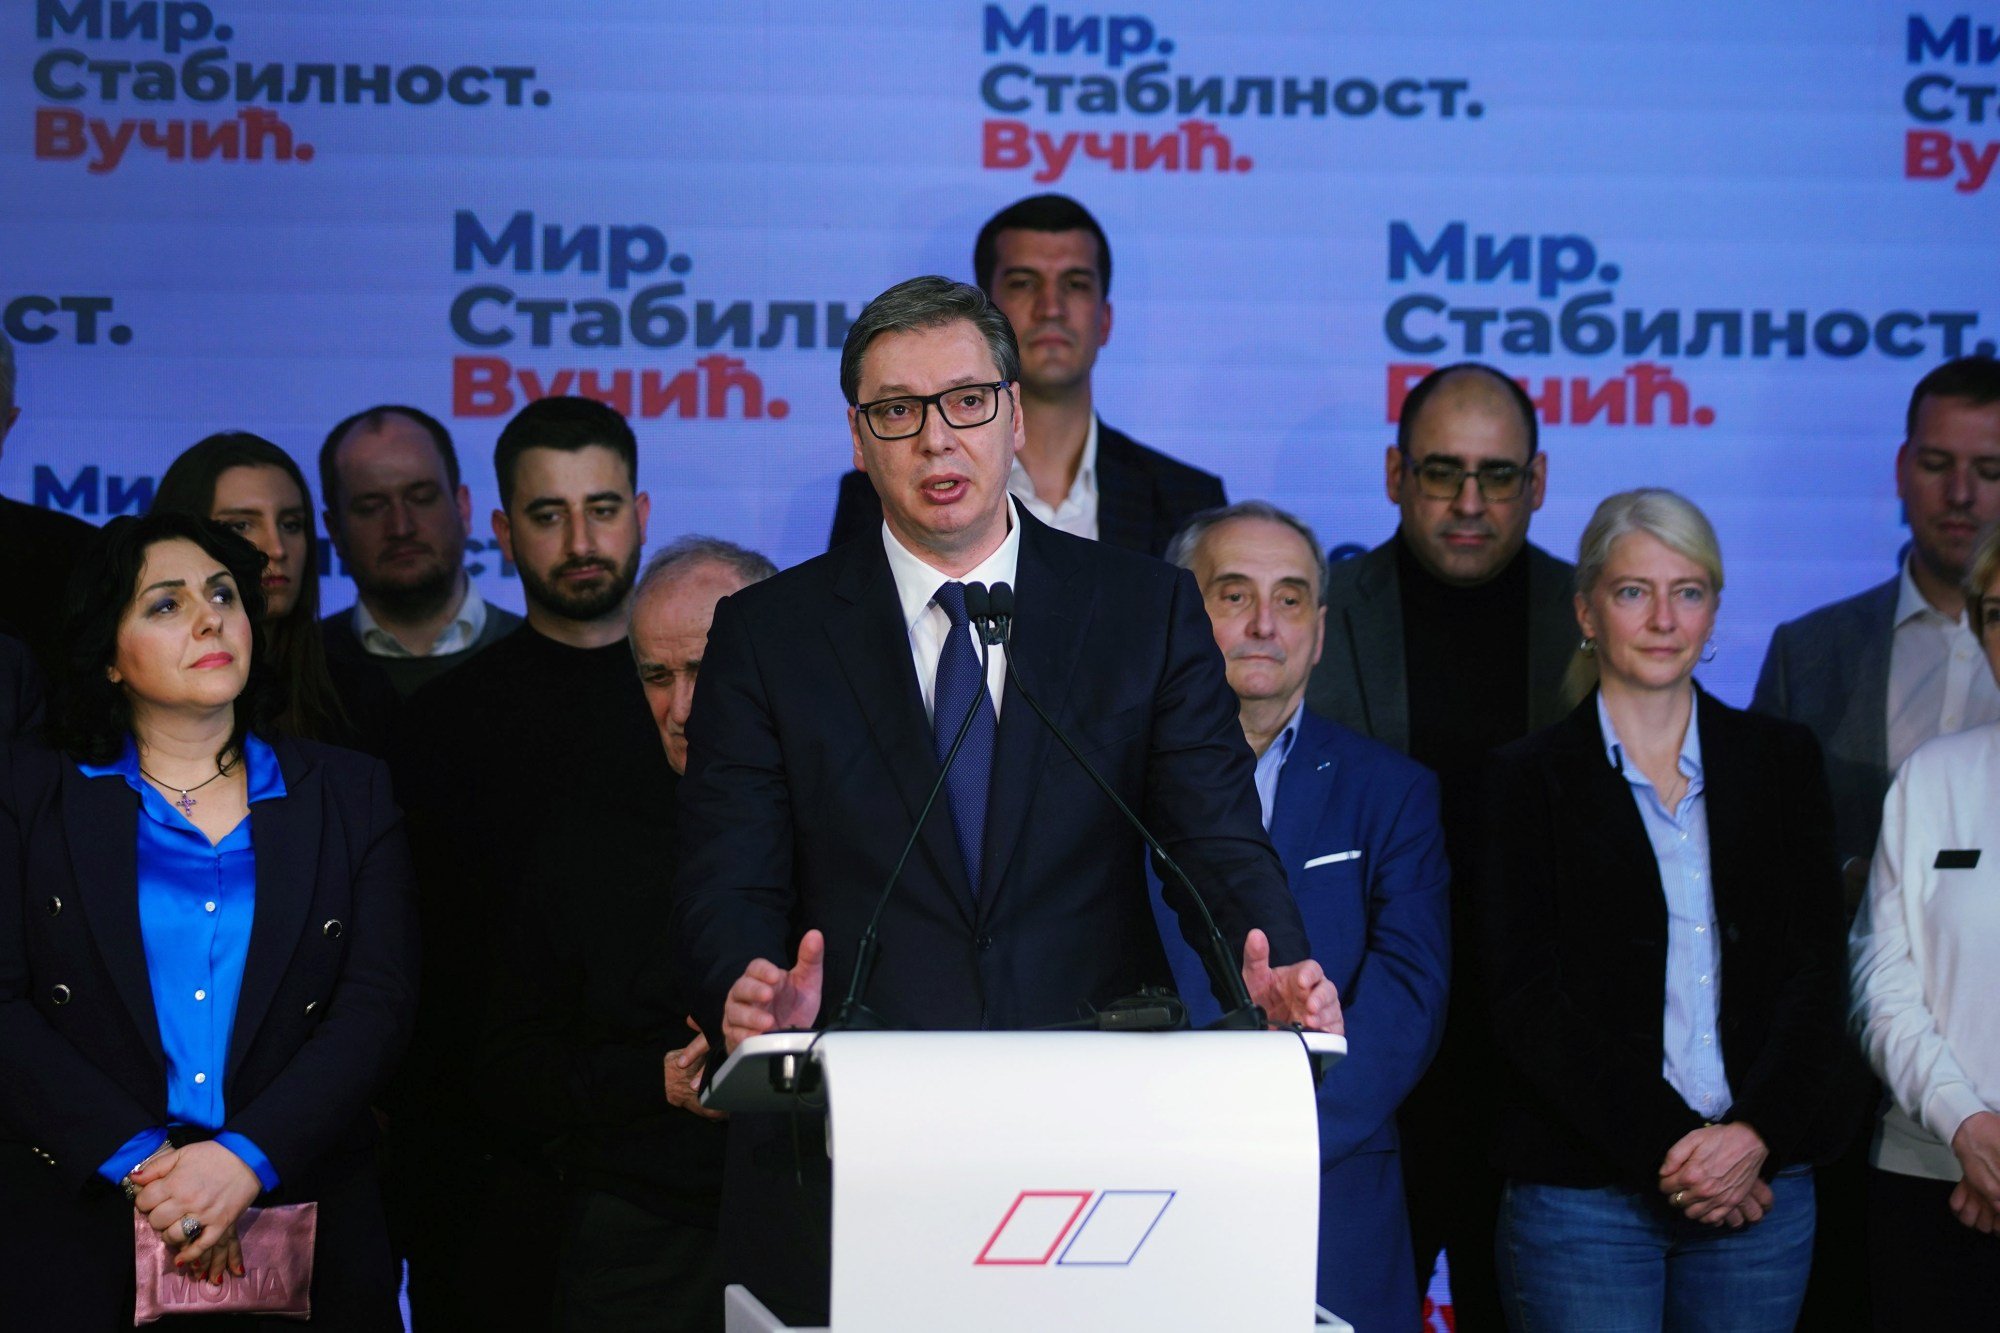 Serbian President Aleksandar Vucic speaks at election night event at his party headquarters in Belgrade on Sunday. Photo: Bloomberg